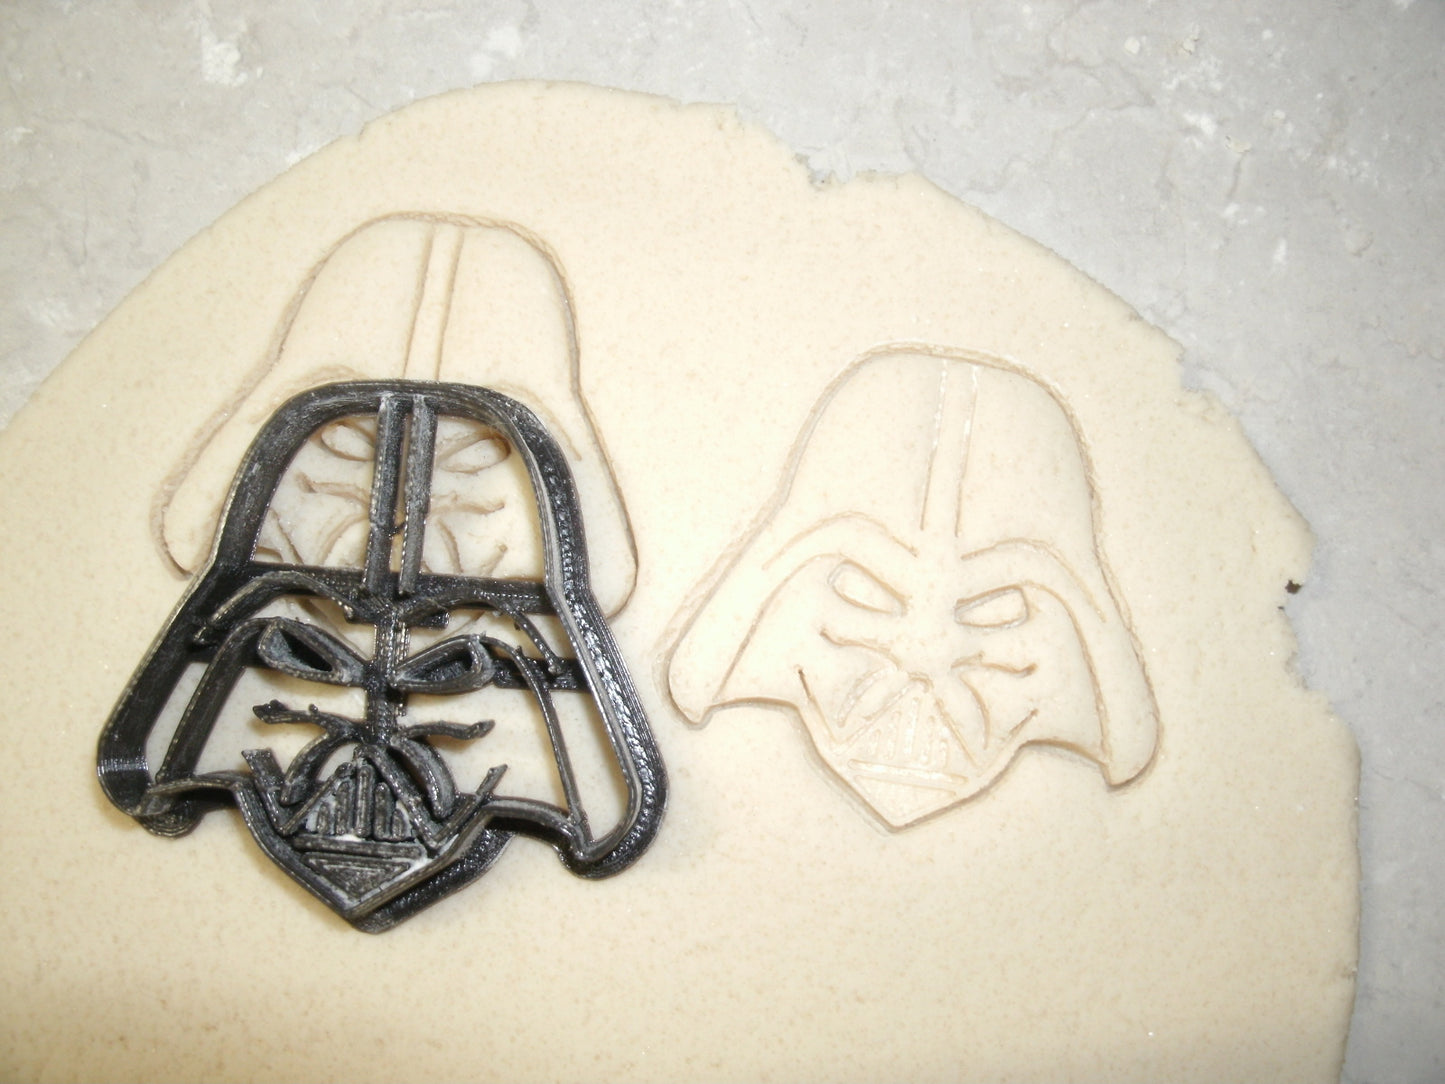 Star Wars Movie Characters Themed Set Of 8 Cookie Cutters Made In USA PR1023